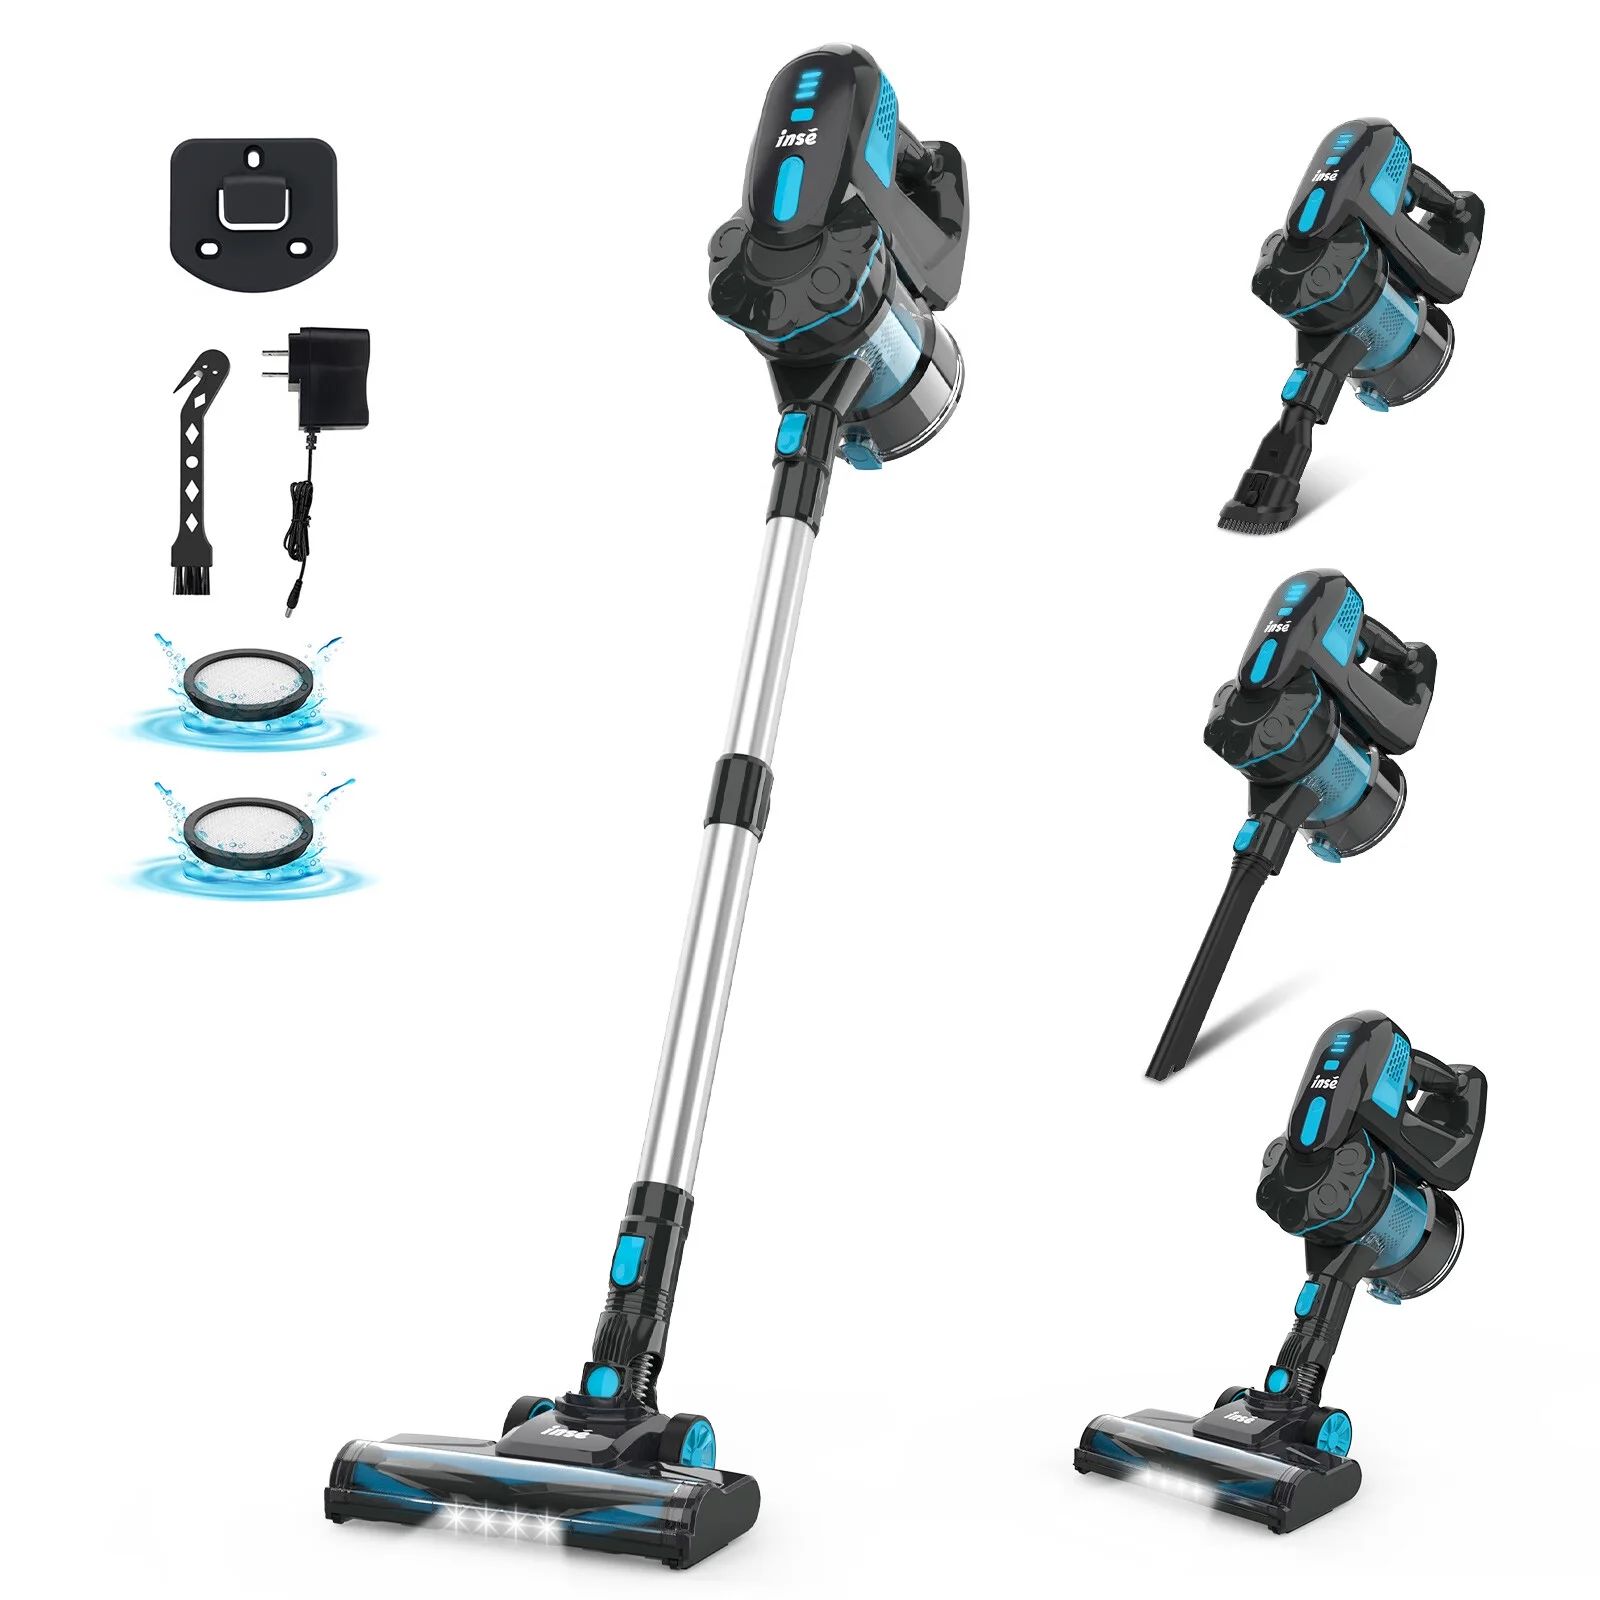 INSE Cordless Vacuum Cleaners, 6-in-1 Stick Vacuum for Floor Pet Hair Home, V770 | Walmart (US)